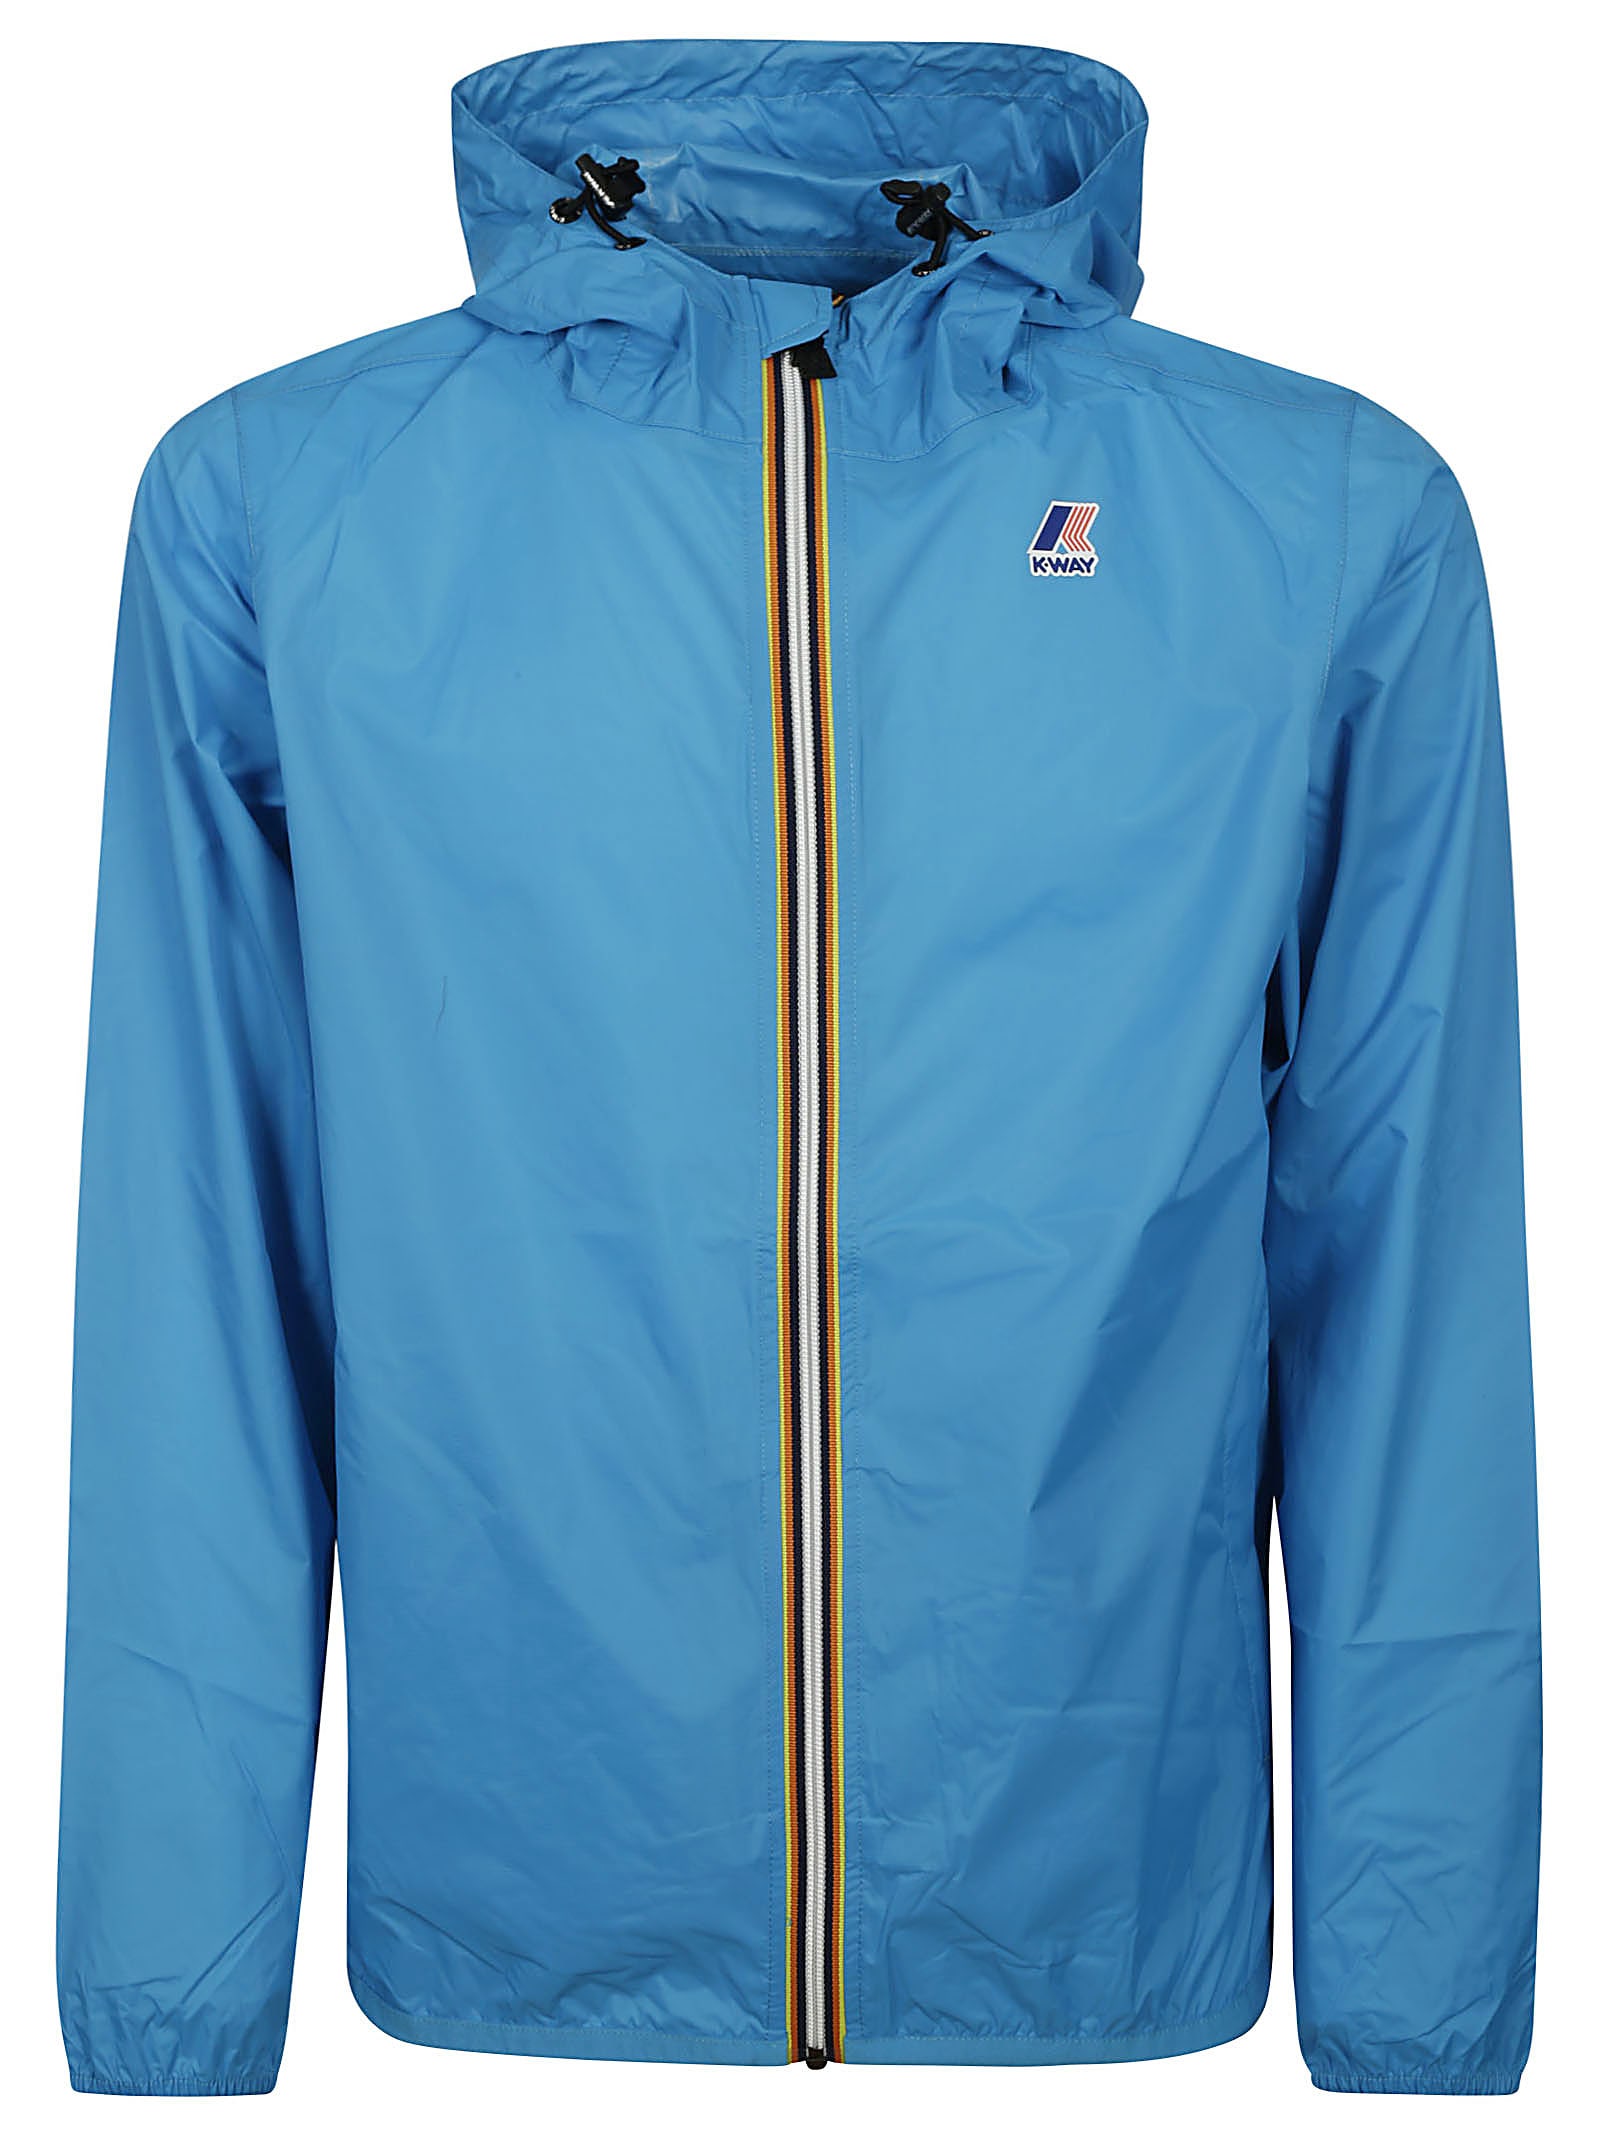 K-way Le Vrai 3.0 Claude Jacket In Turquoise